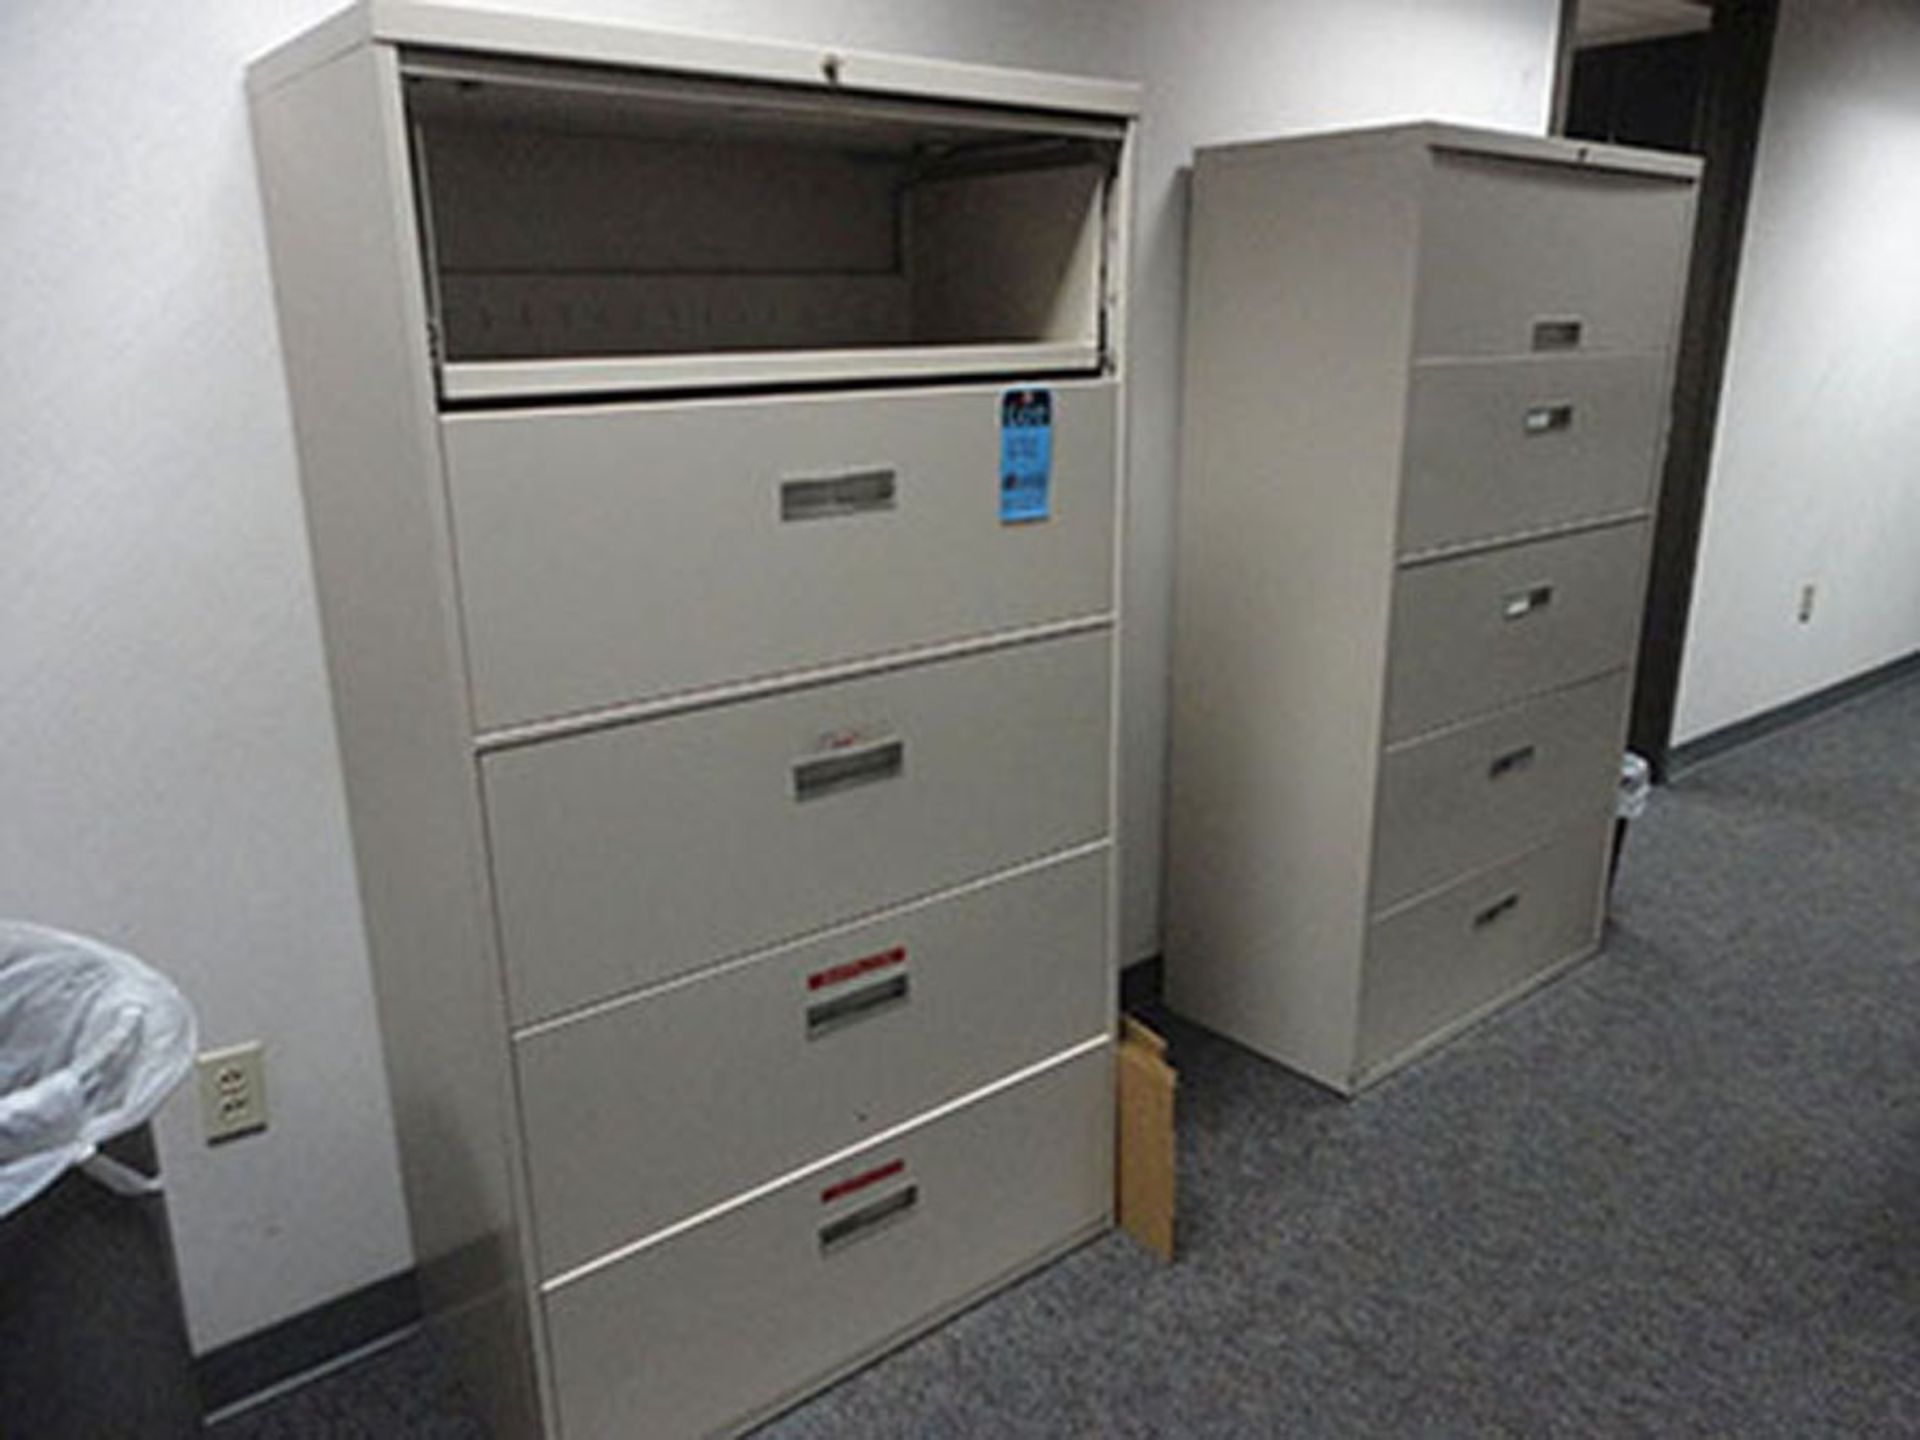 LATERAL FILE CABINETS (X2)